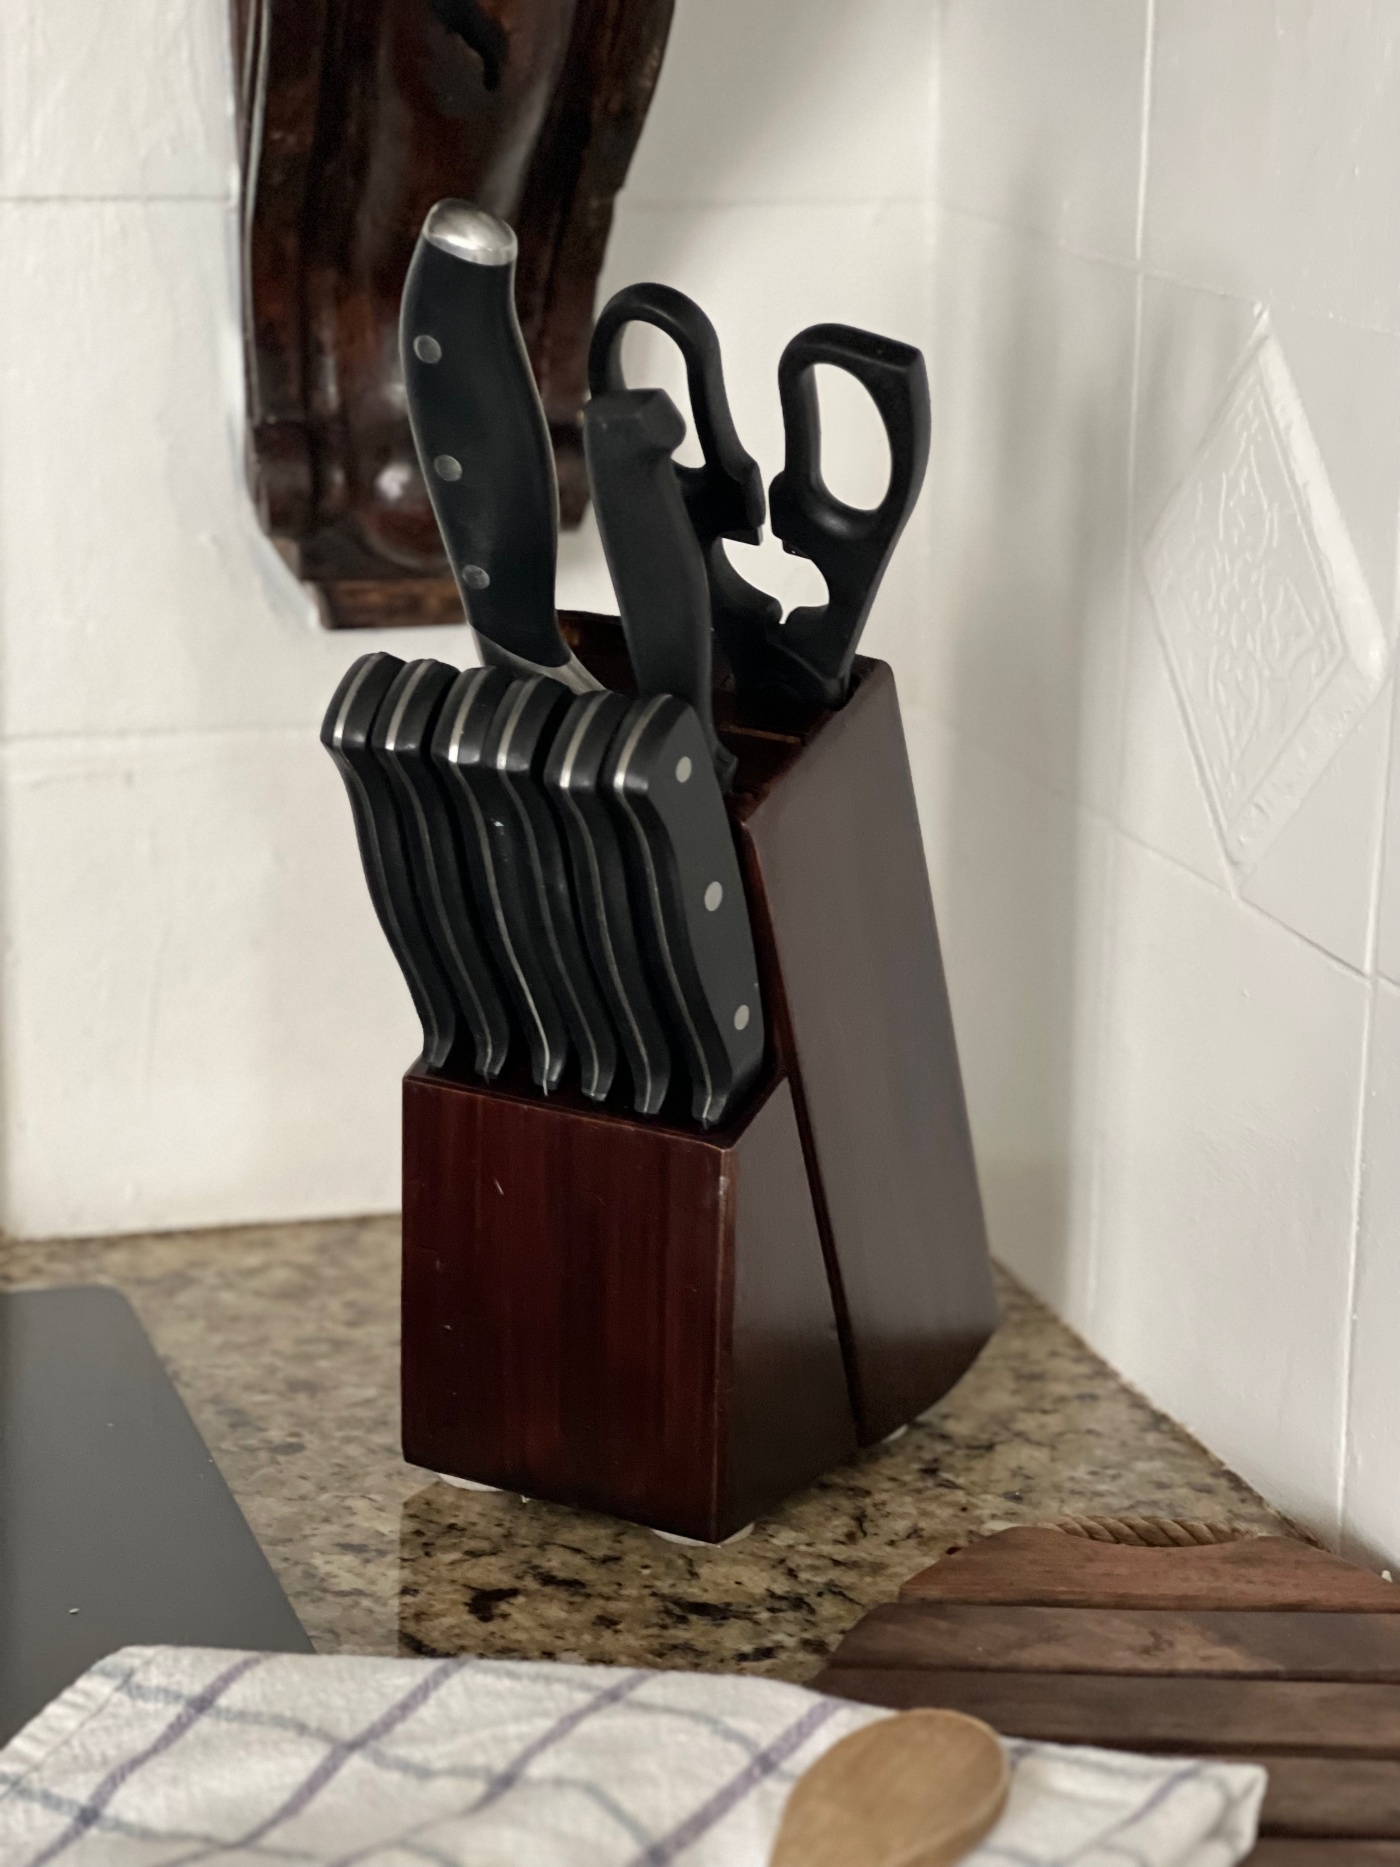 Knife Block Makeover with Gel Stain - The Wicker House